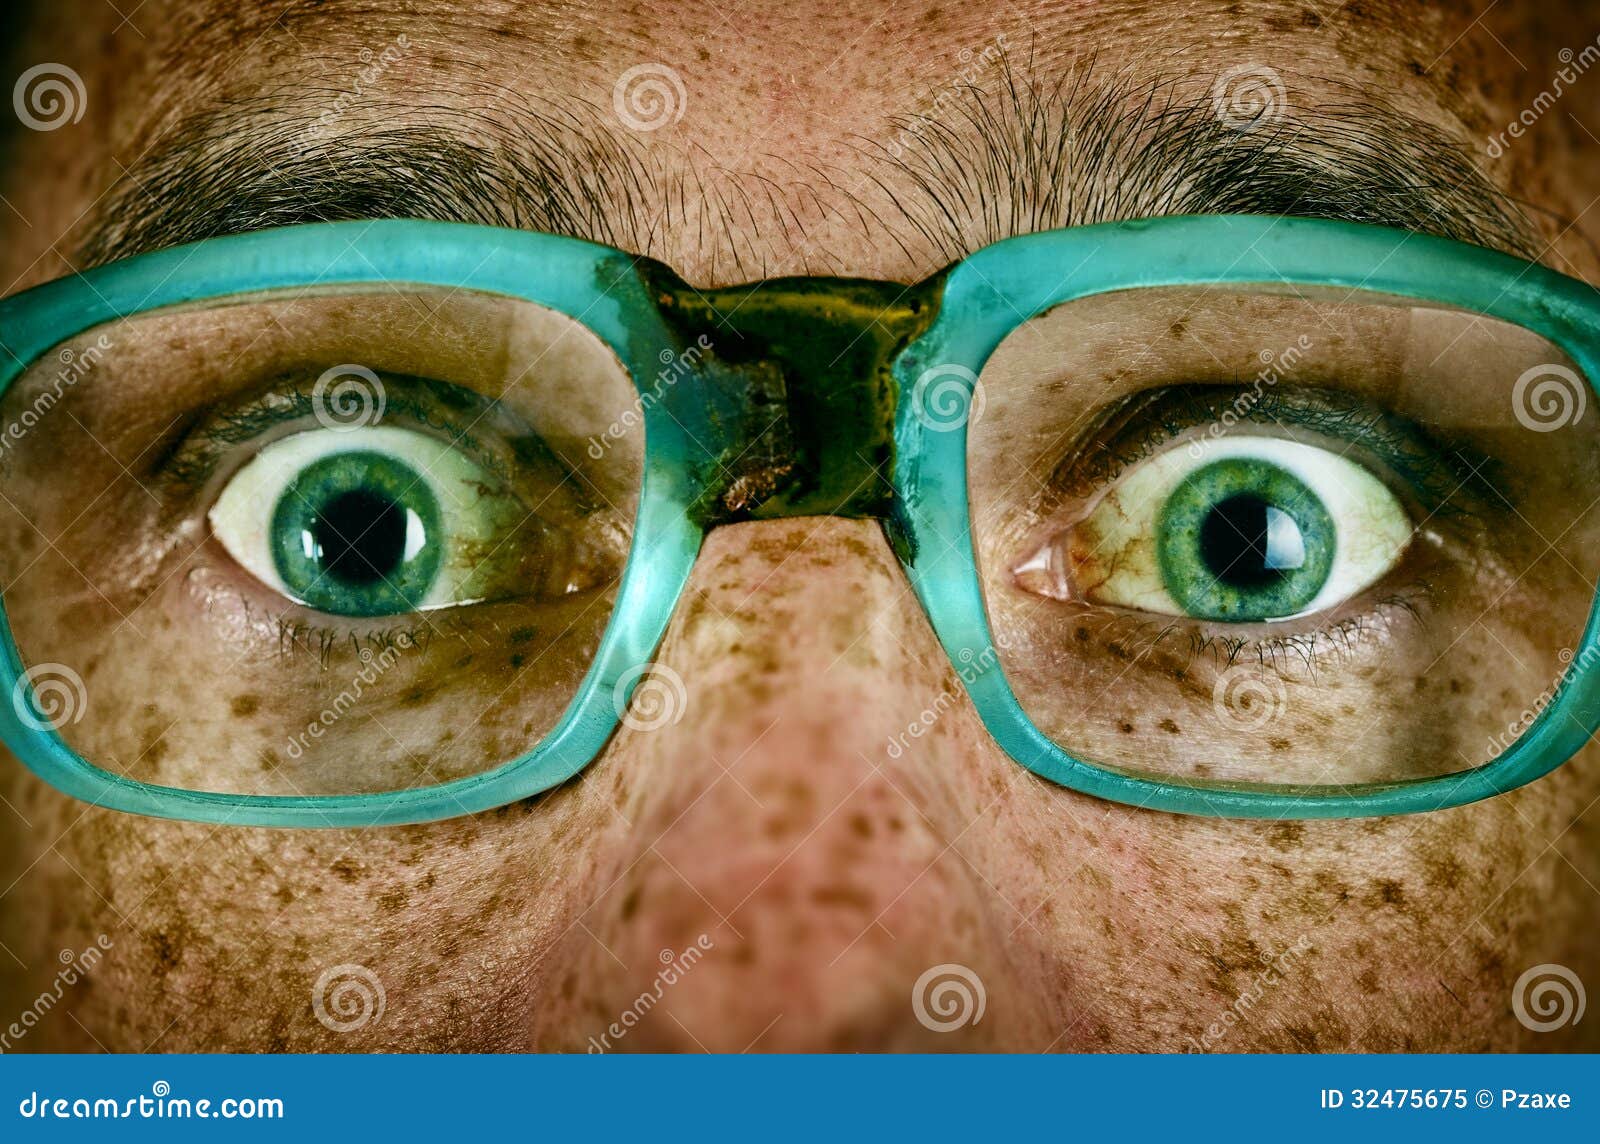 frightened look of a man in old glasses